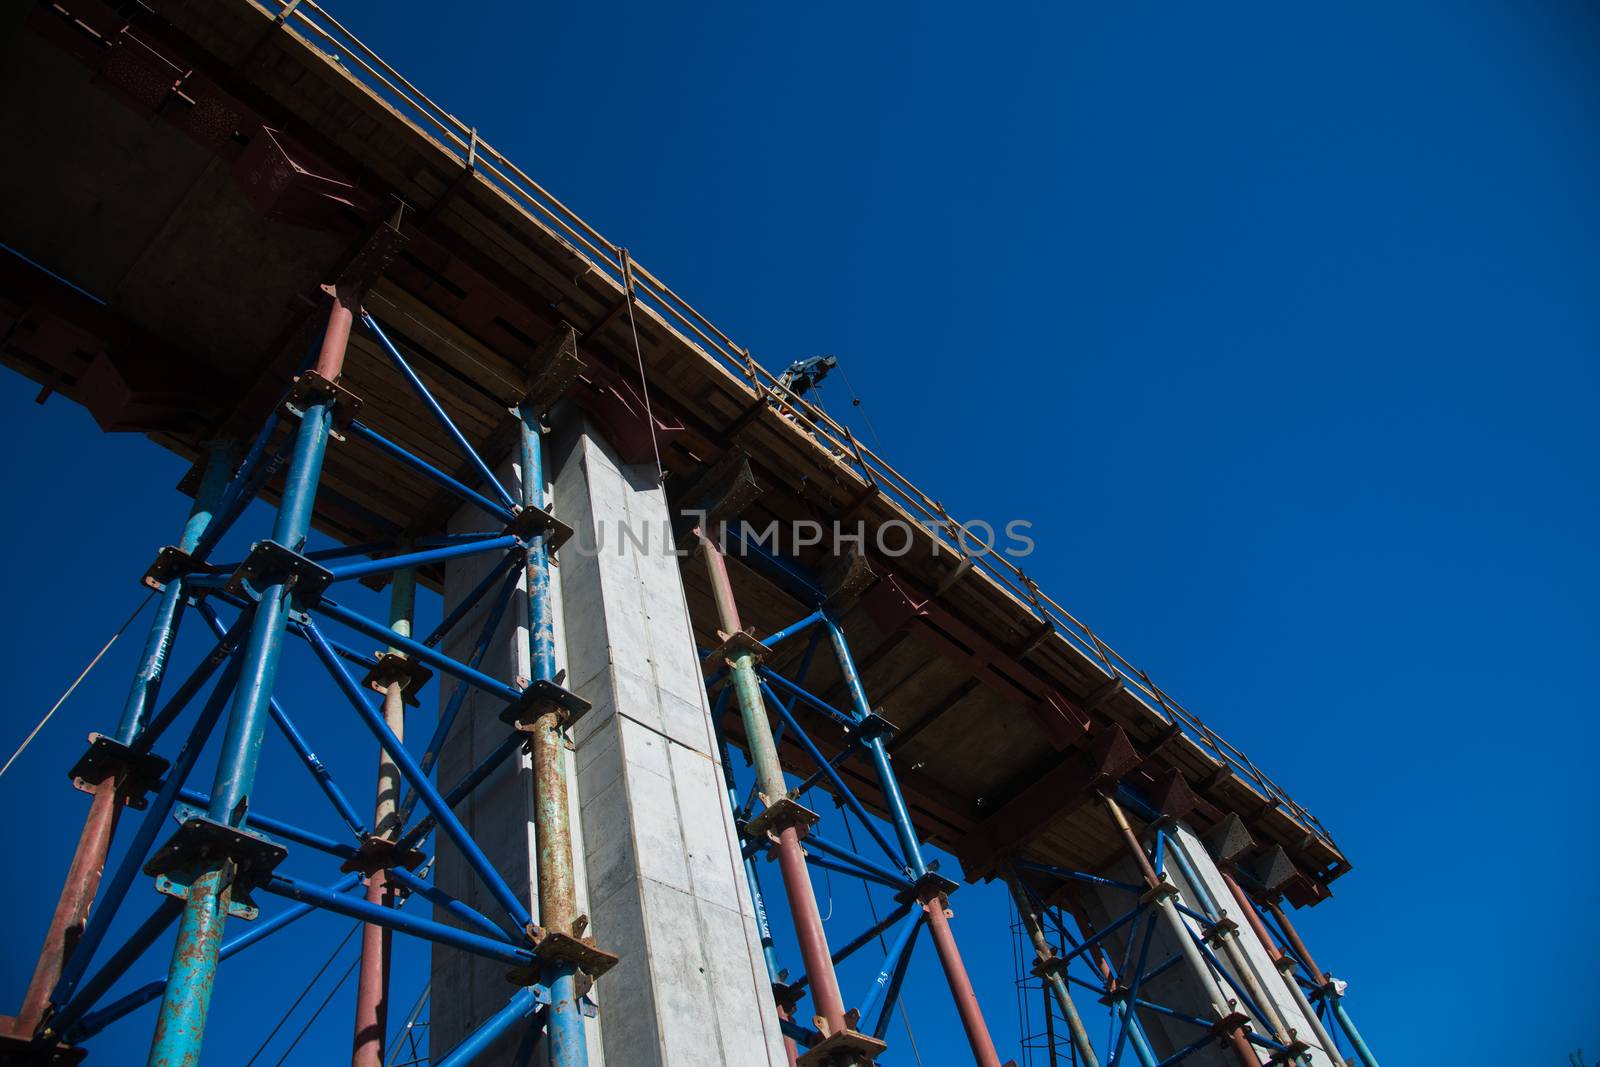 Construction of the interchange of a road bridge across the river. Builders and construction equipment on the construction site. The support of the bridge against the blue sky.